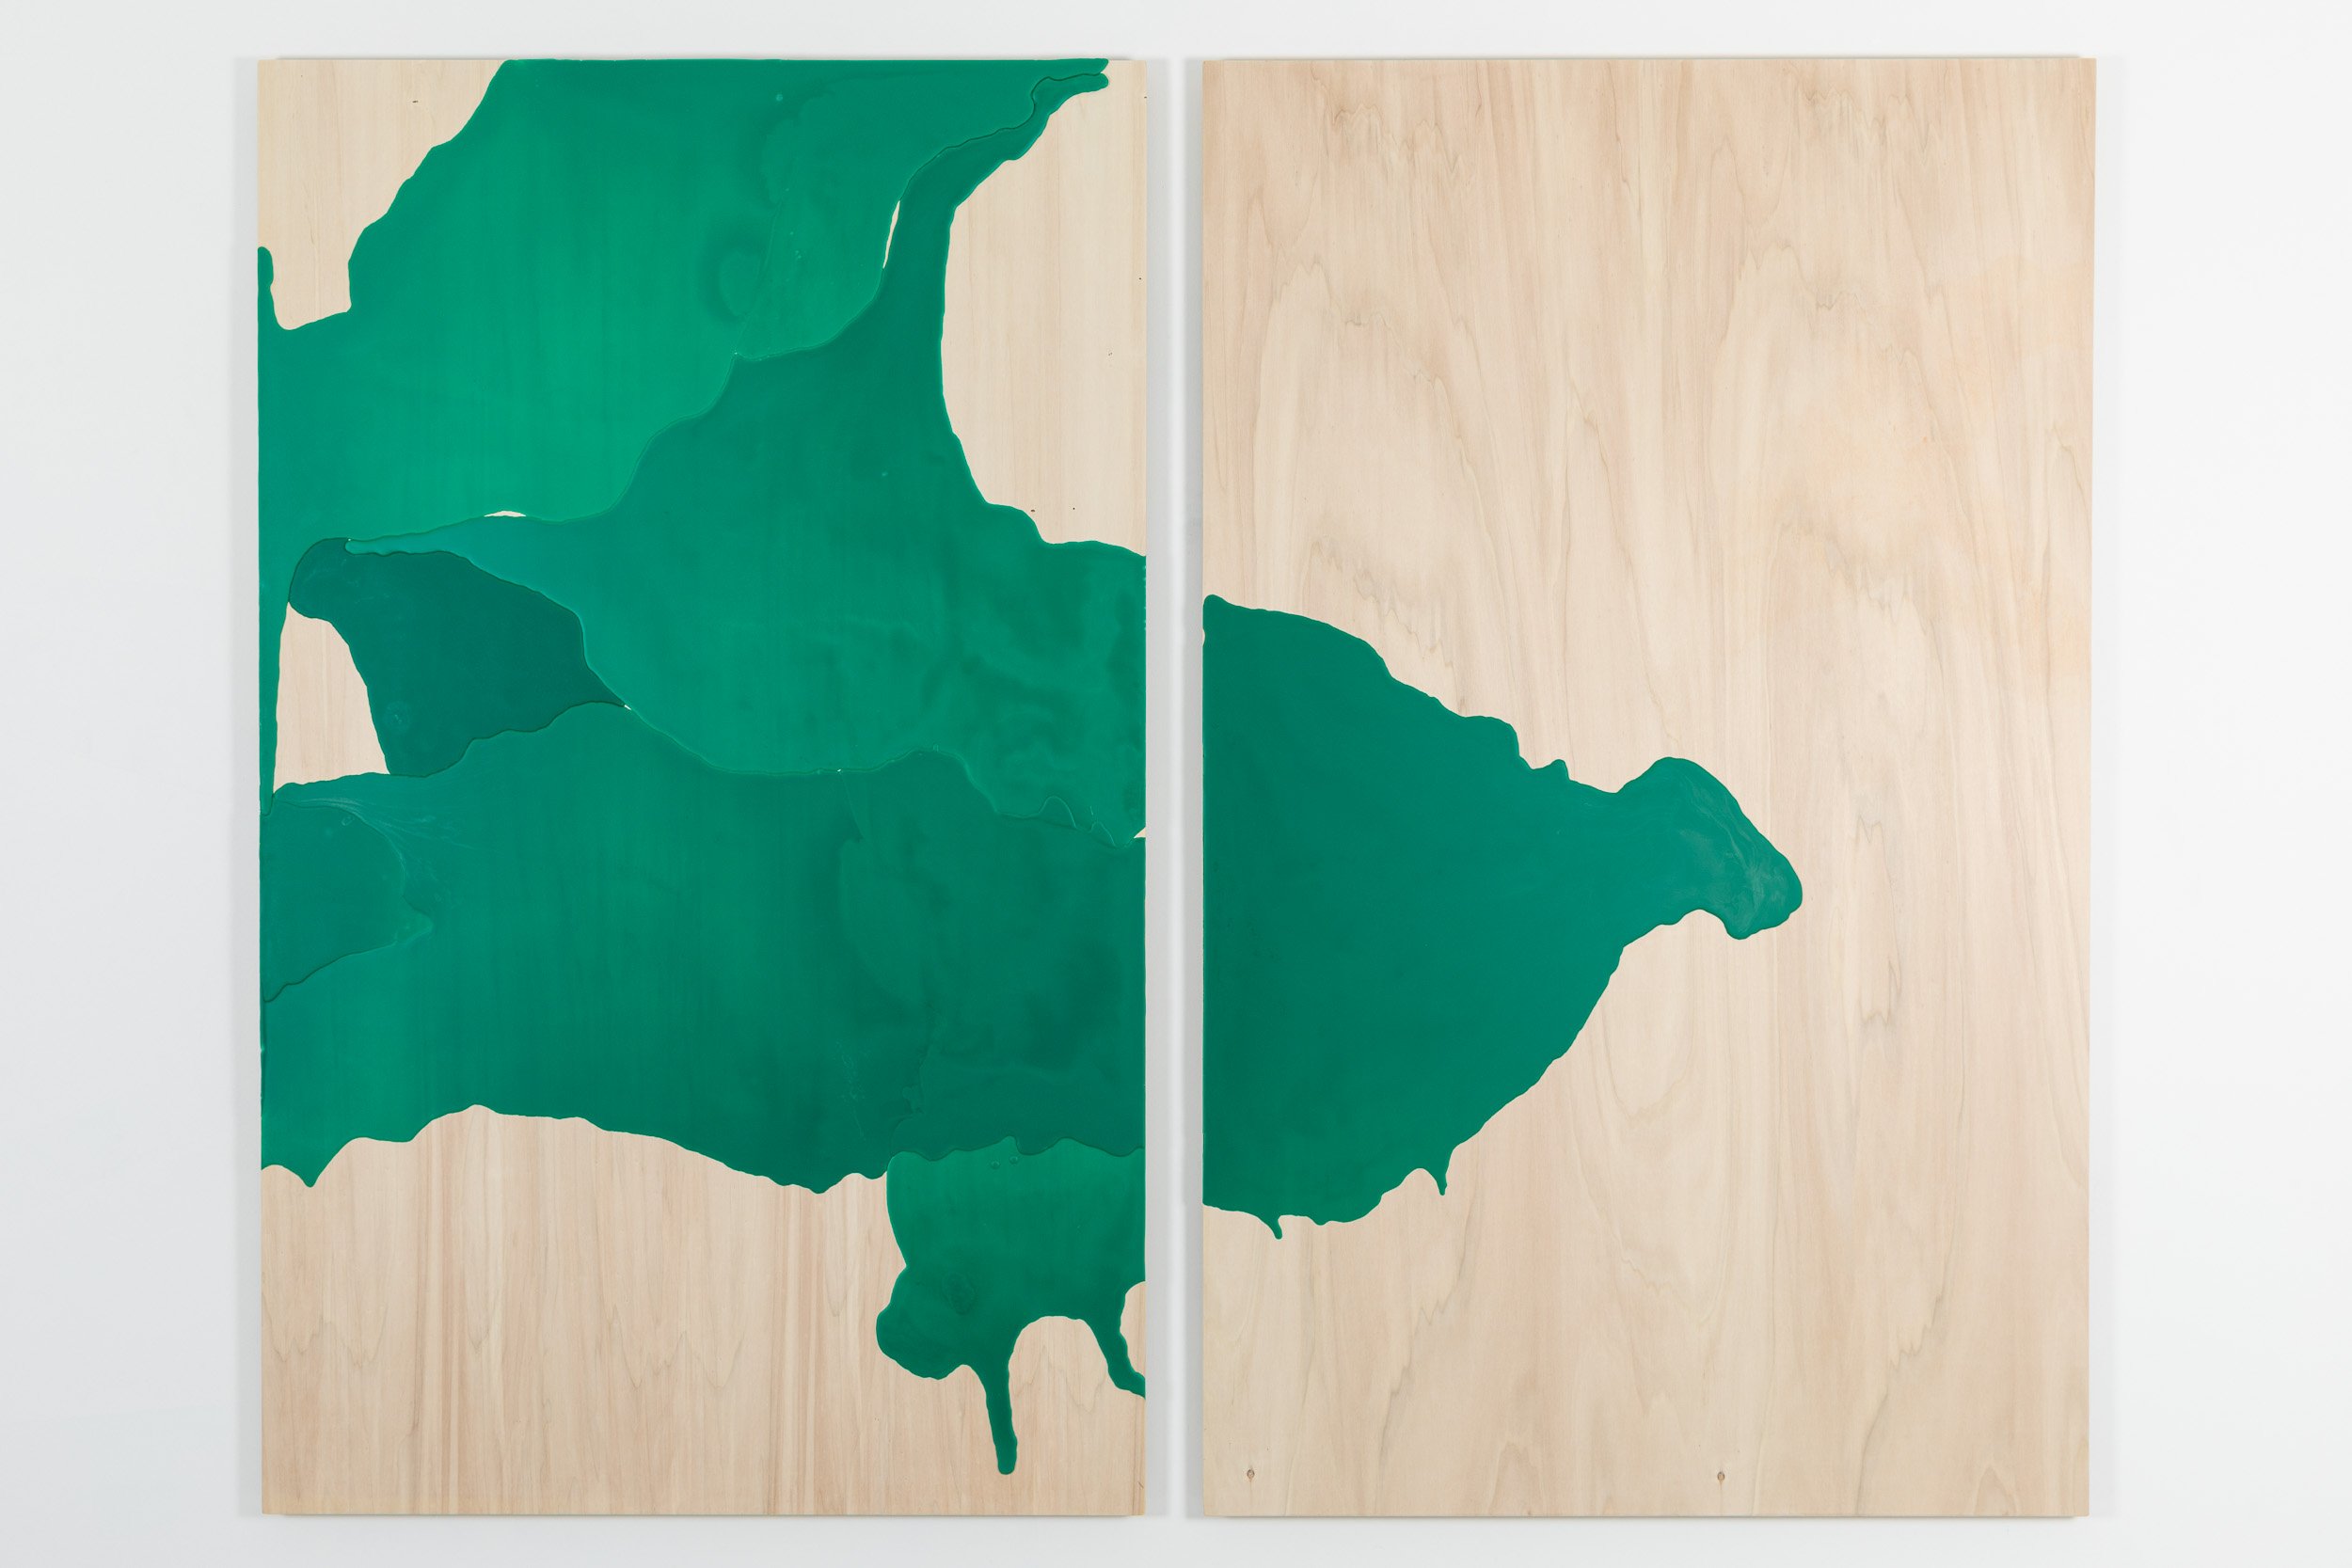  CC - CR # 1 (greens) Beeswax, pigments and gum resin on poplar panel. Overall 200 x 252 cm  